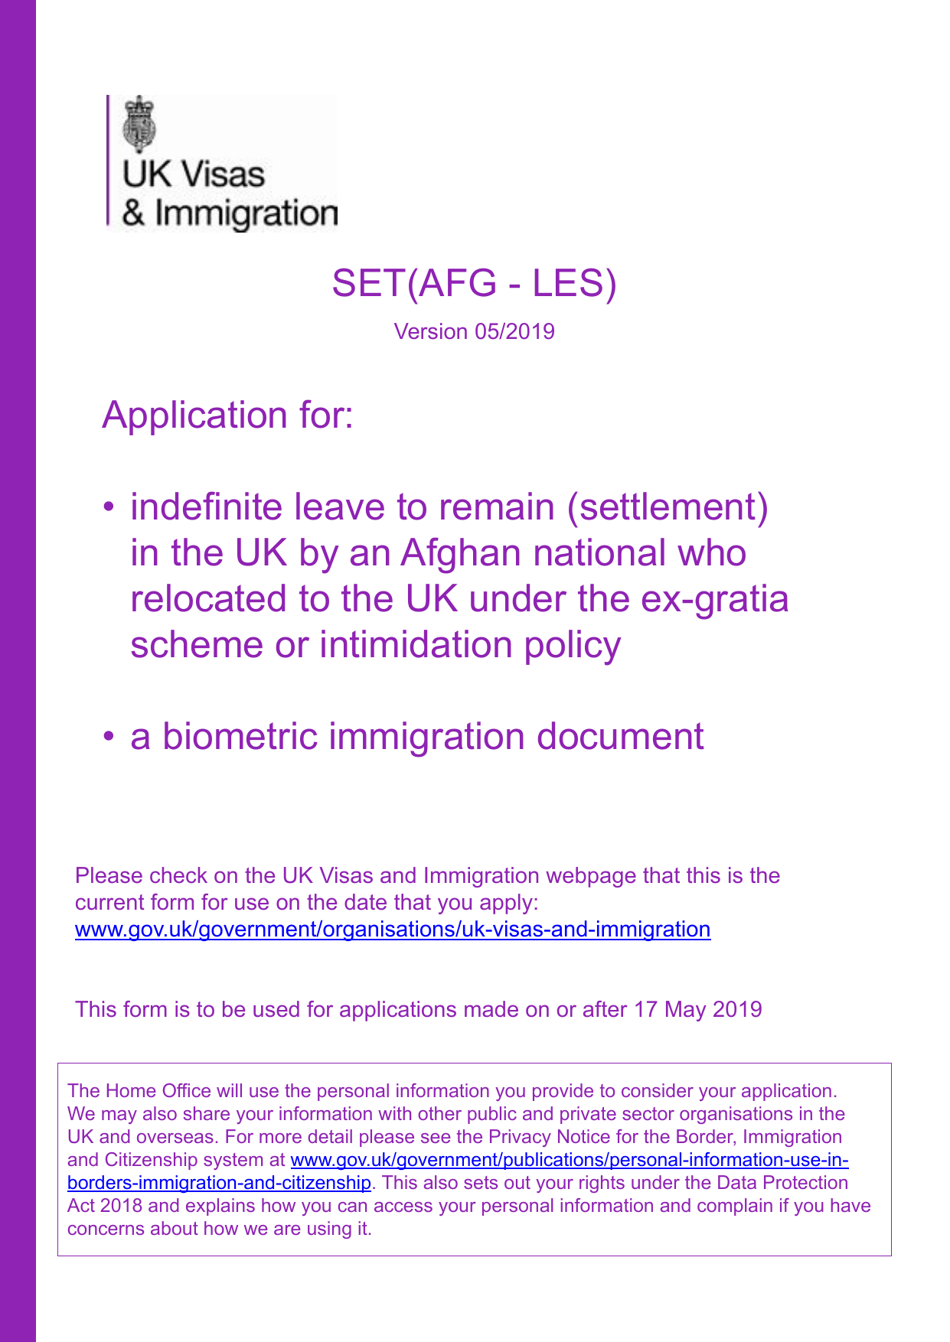 Form SET(AFG-LES) Application for Indefinite Leave to Remain (Settlement) in the UK by an Afghan National Who Relocated to the UK Under the Ex-gratia Scheme or Intimidation Policy and a Biometric Immigration Document - United Kingdom, Page 1